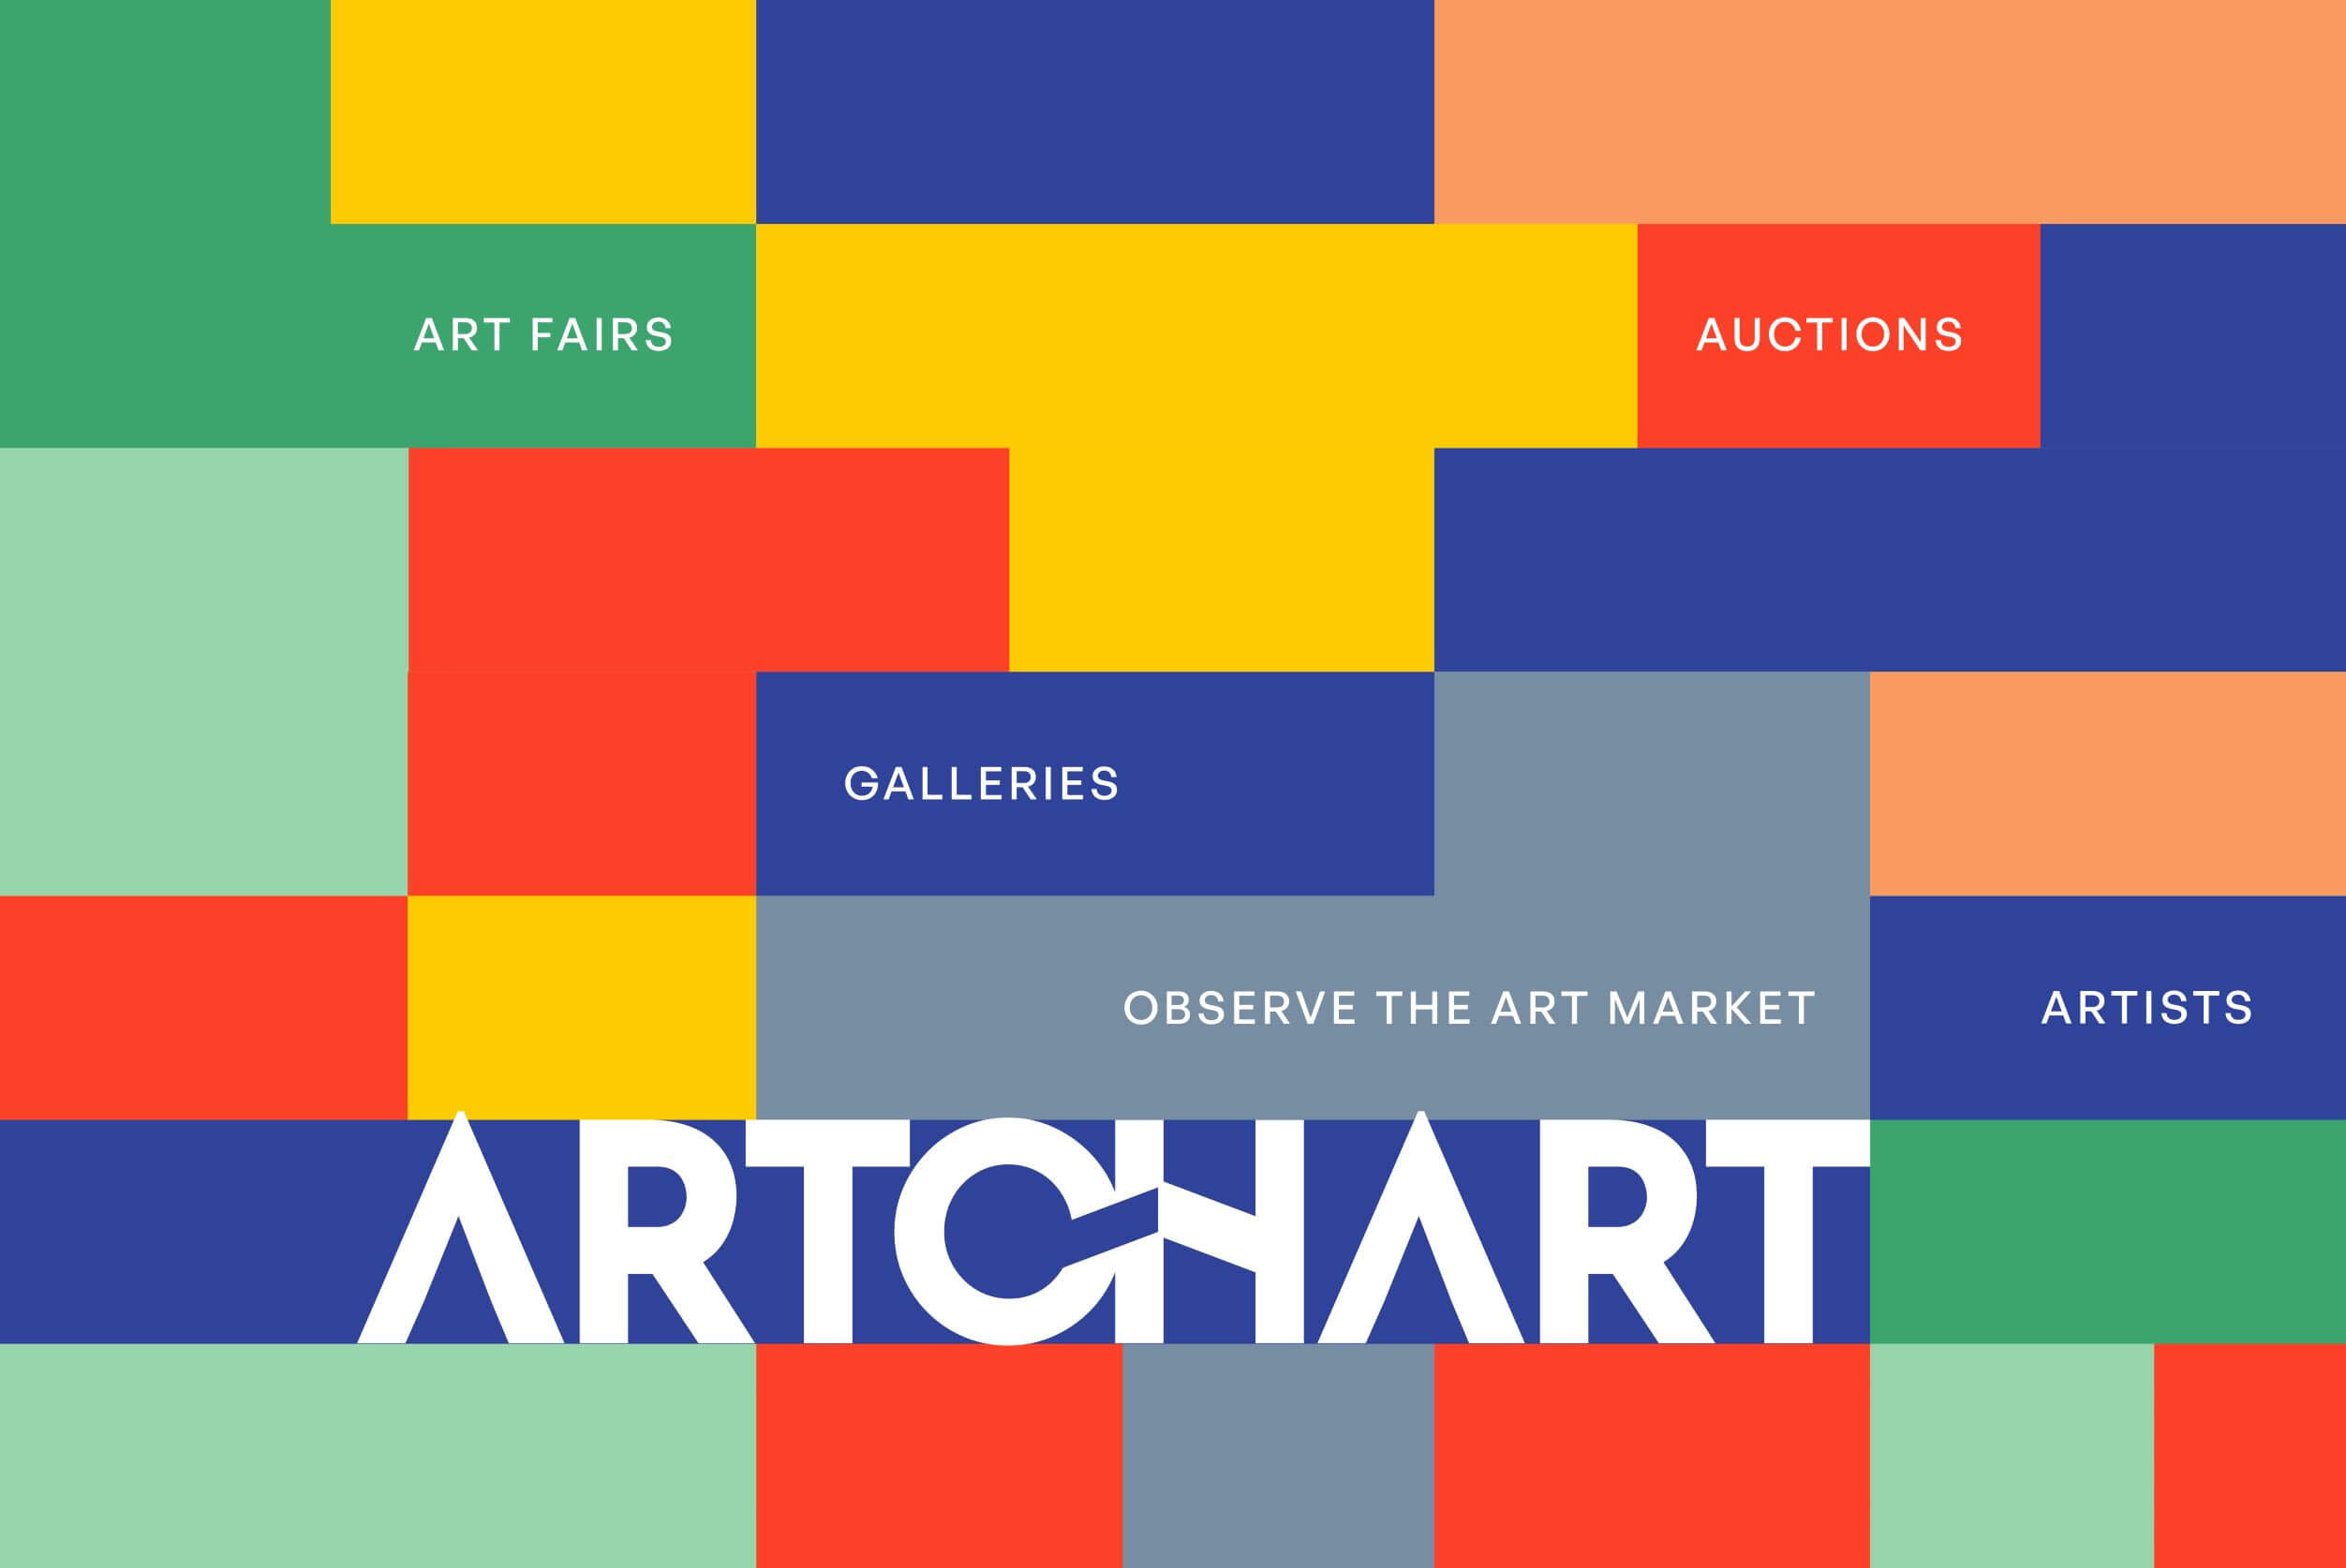 Why use ArtChart?